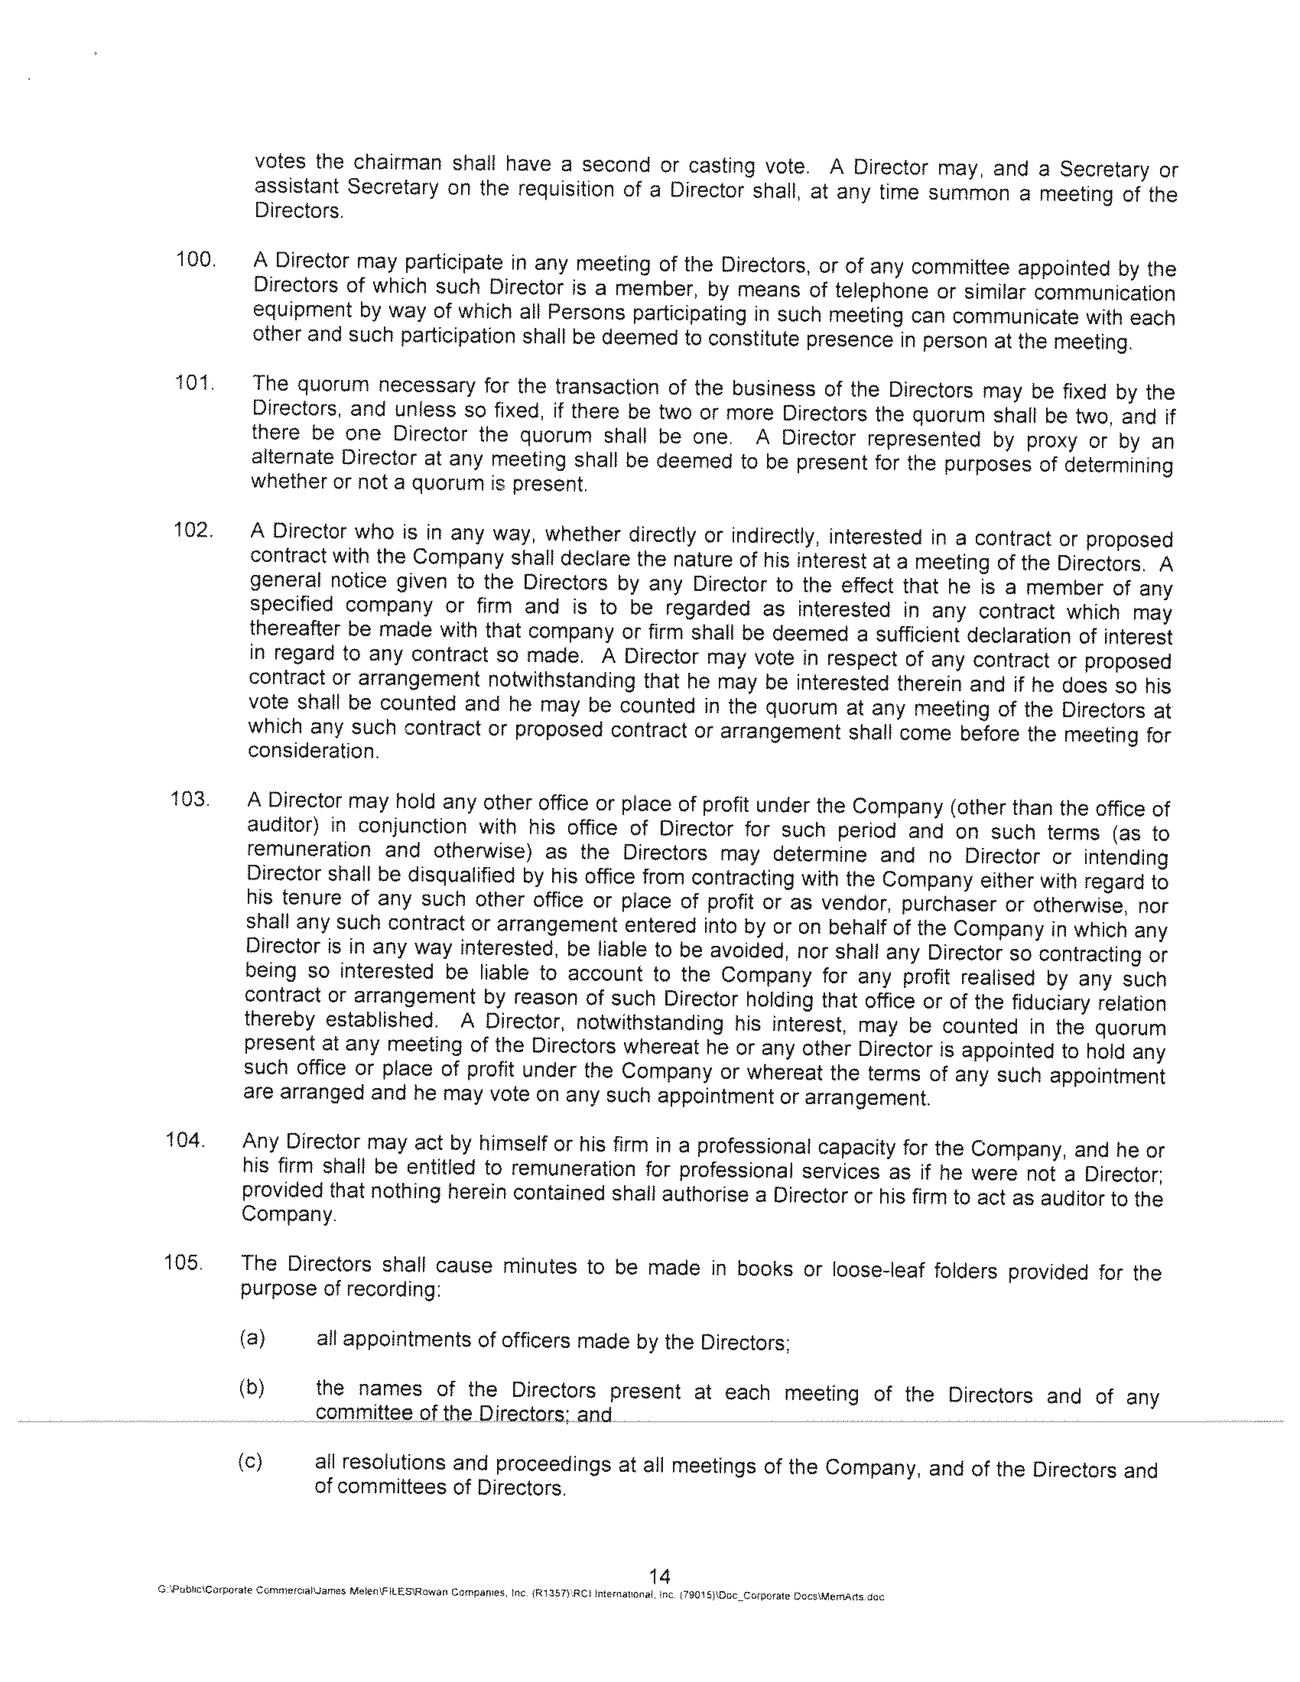 New Microsoft Word Document - Copy_page003page020page001 memorandum and articles of association of rci international inc_page019.jpg